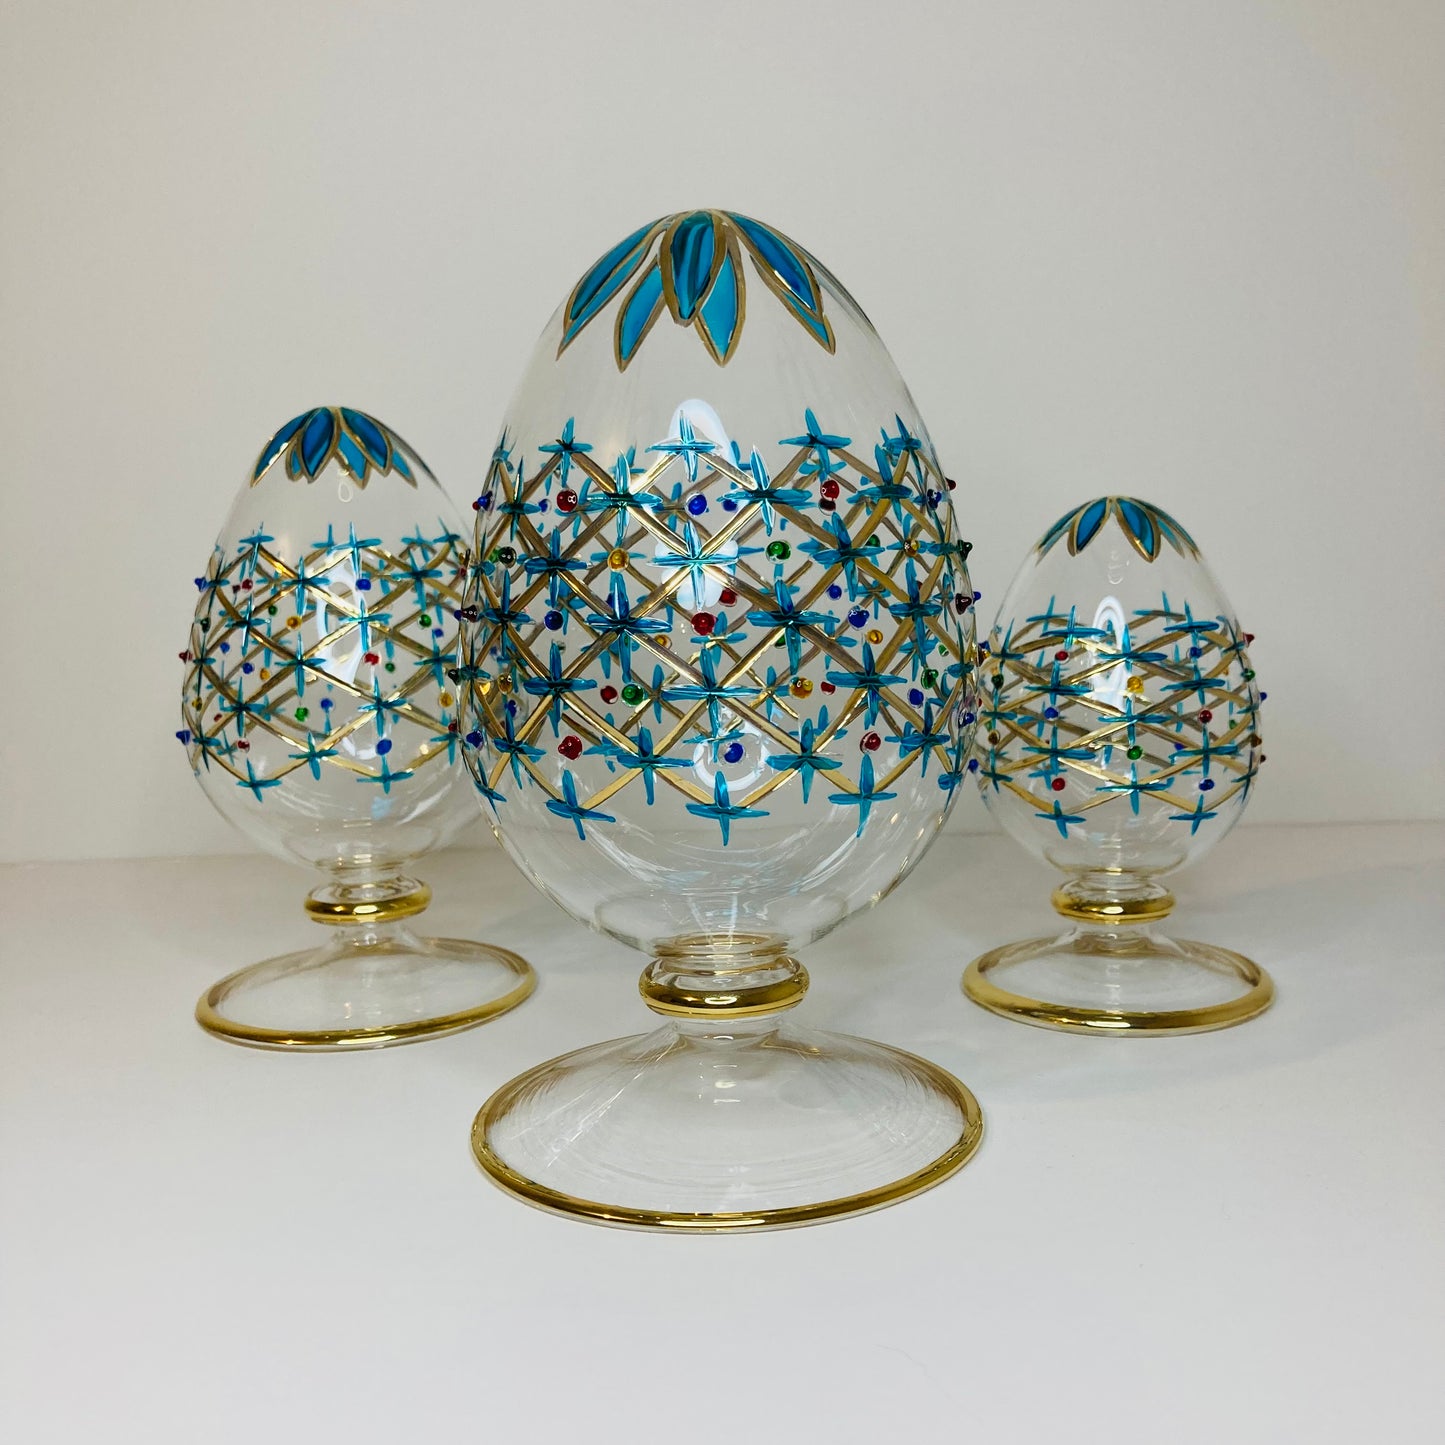 Blown Glass Tabletop Egg - Turquoise Stars